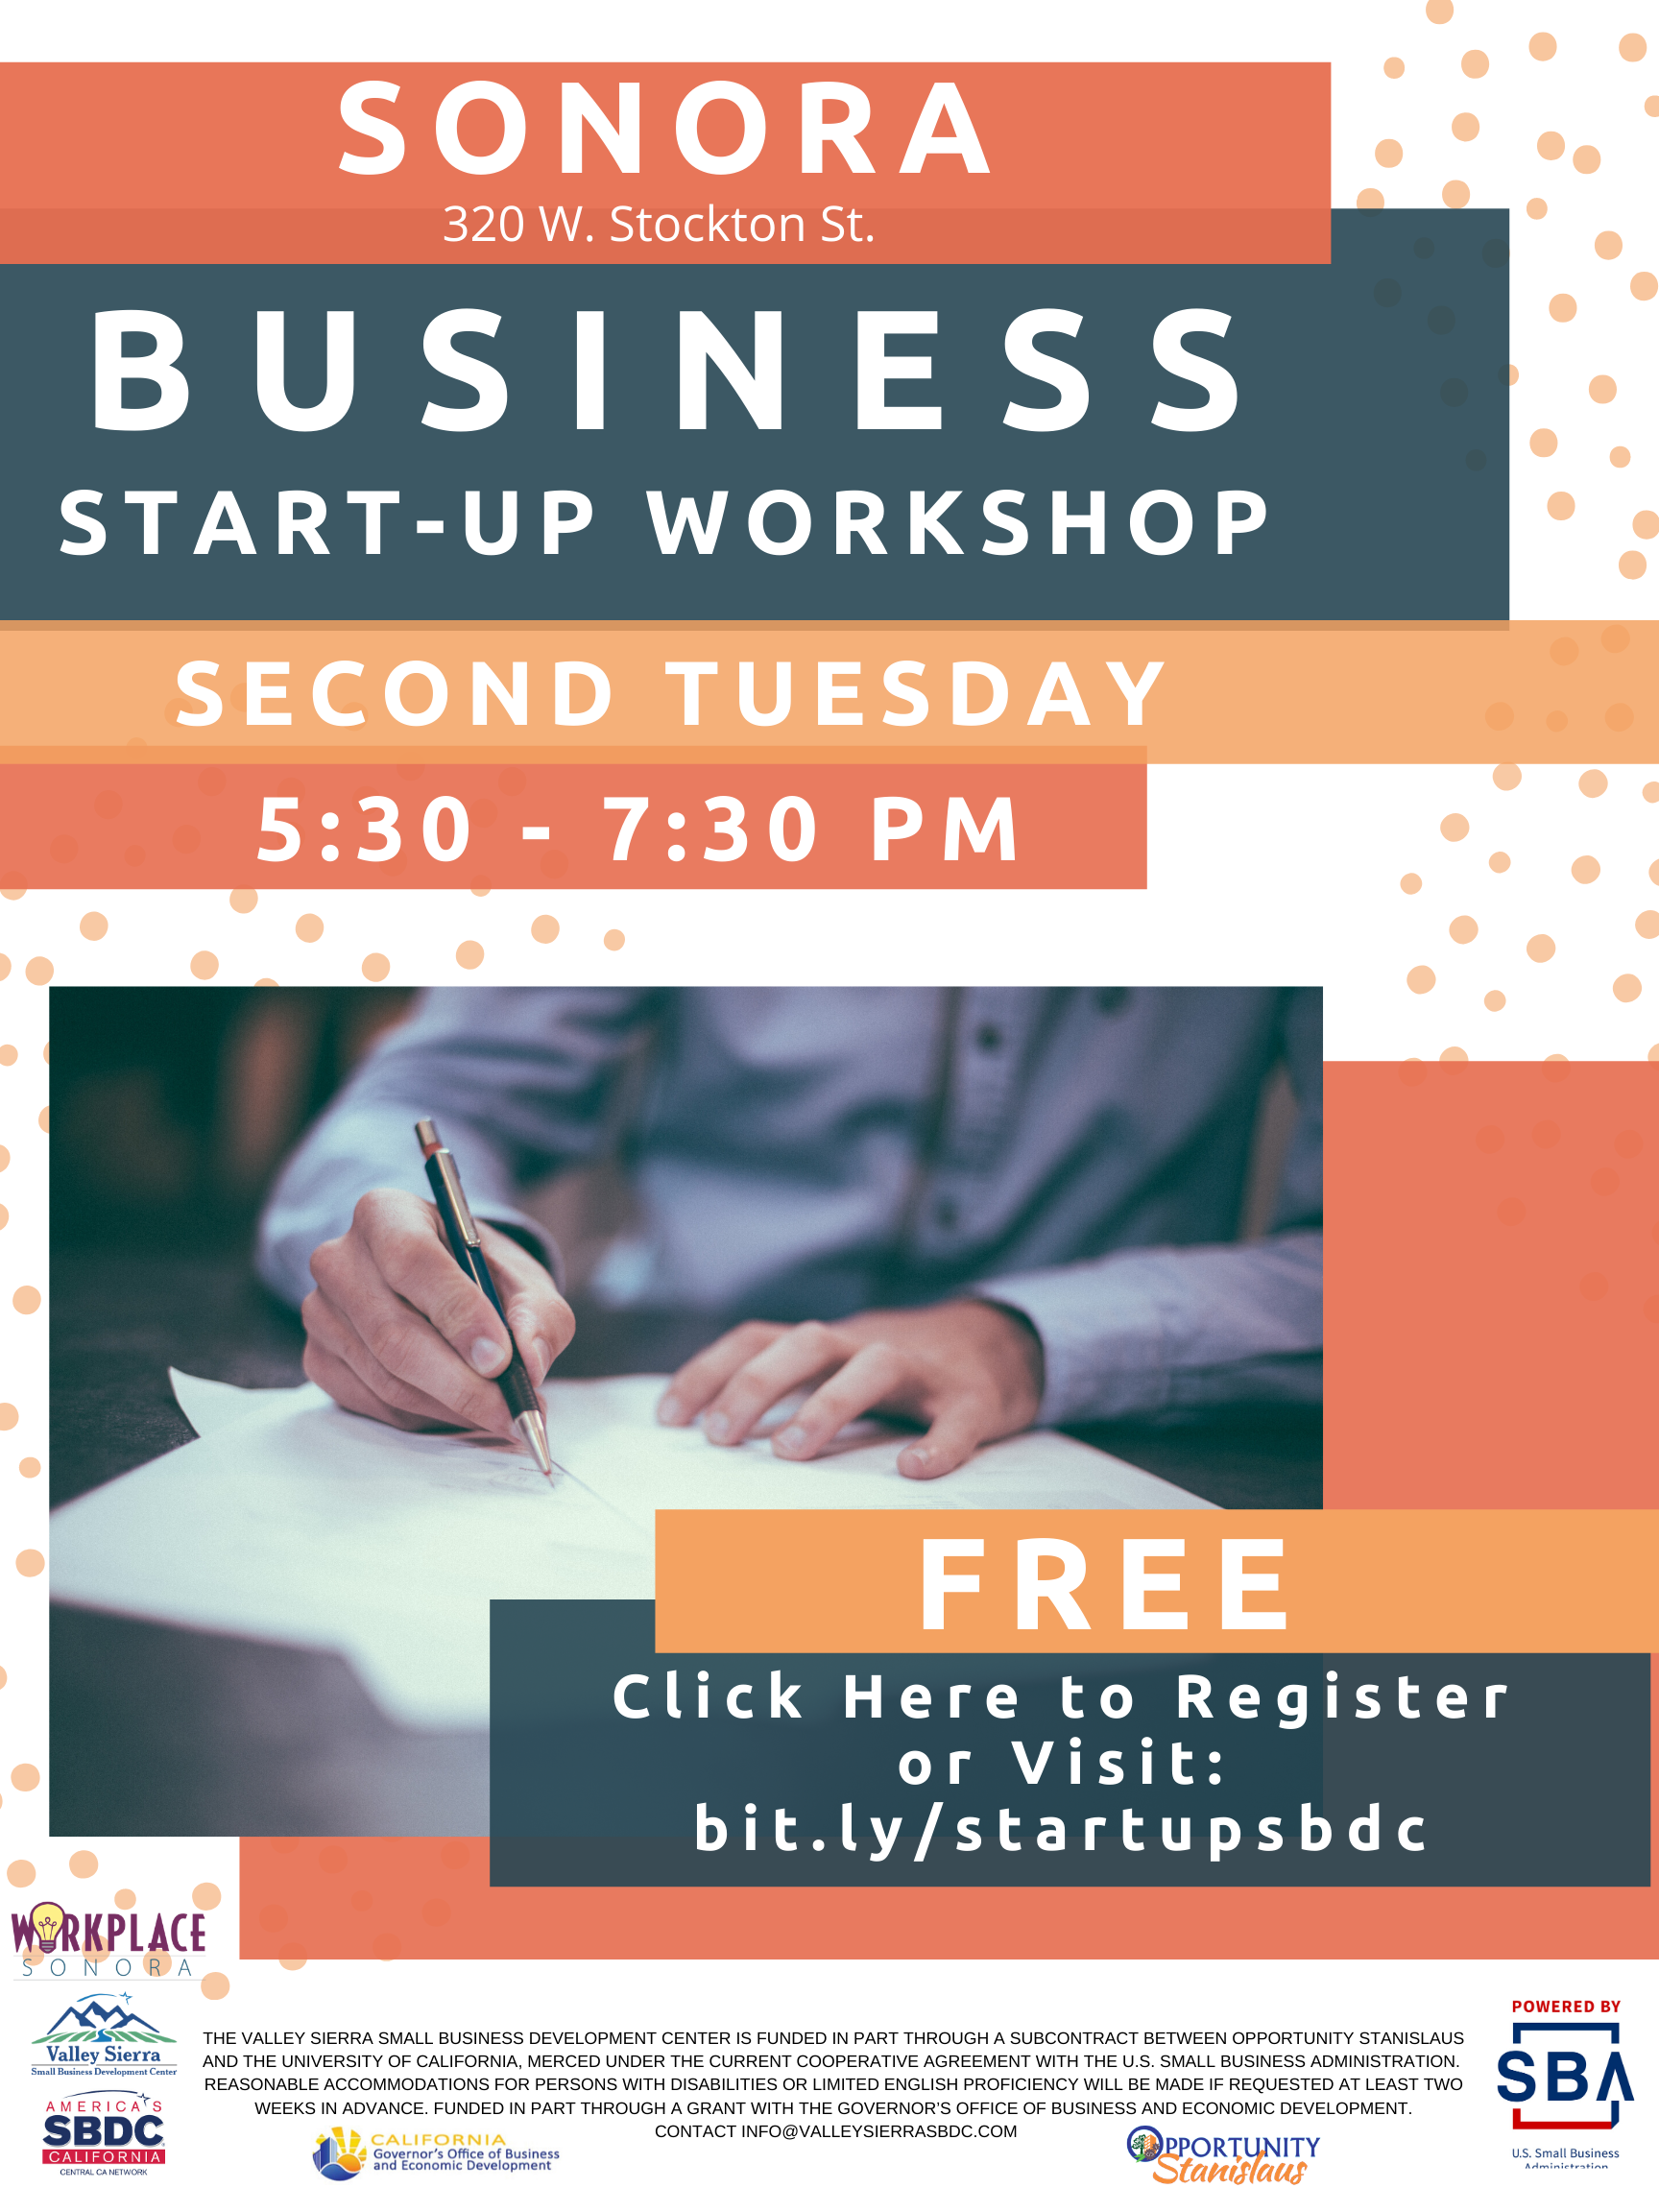 Event Flyer, Sonora: Business Start-Up Workshop, 2nd Tuesday, 5:30pm - 7:30pm. Free Registration Now Open! at Workplace Sonora, 320 W. Stockton Street, Sonora, Ca.